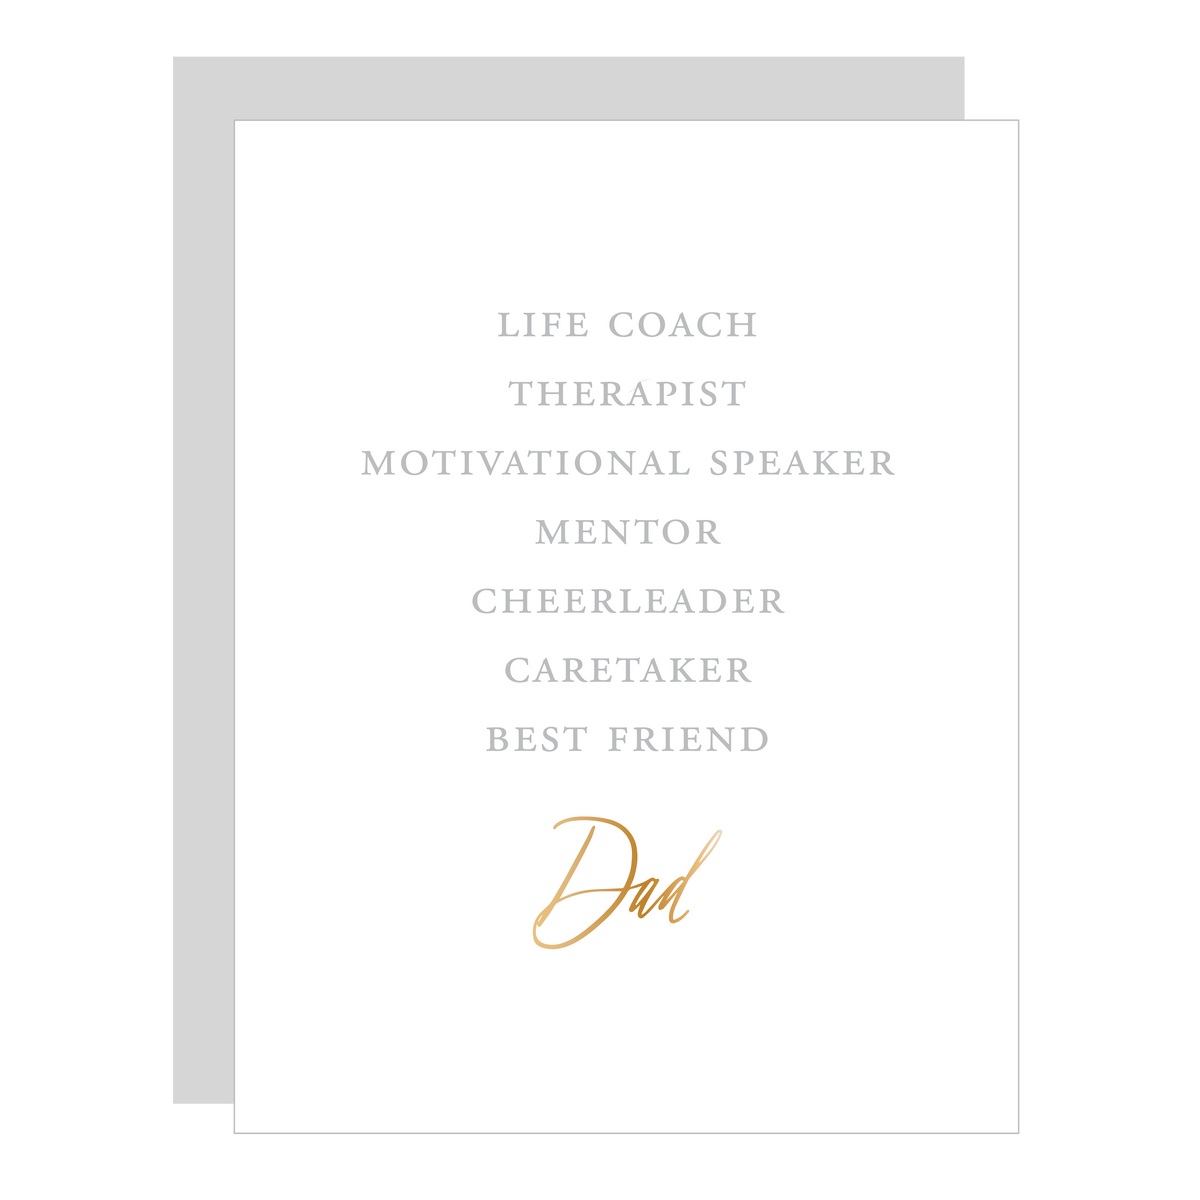 Our &quot;Best Friend, Dad&quot; card, letterpress printed by hand and foil printed